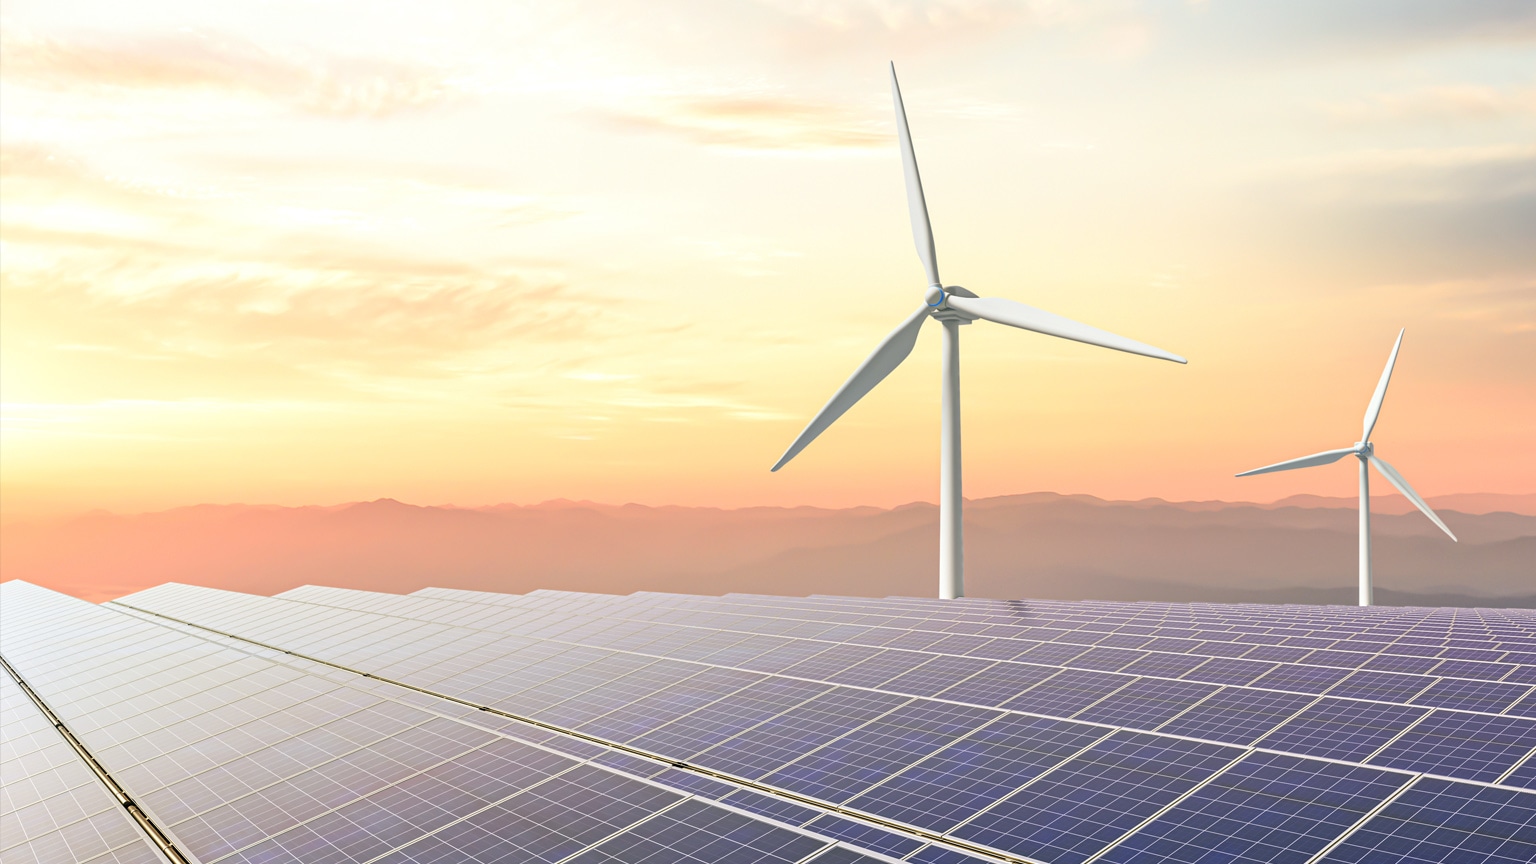 An era of renewable energy growth and development